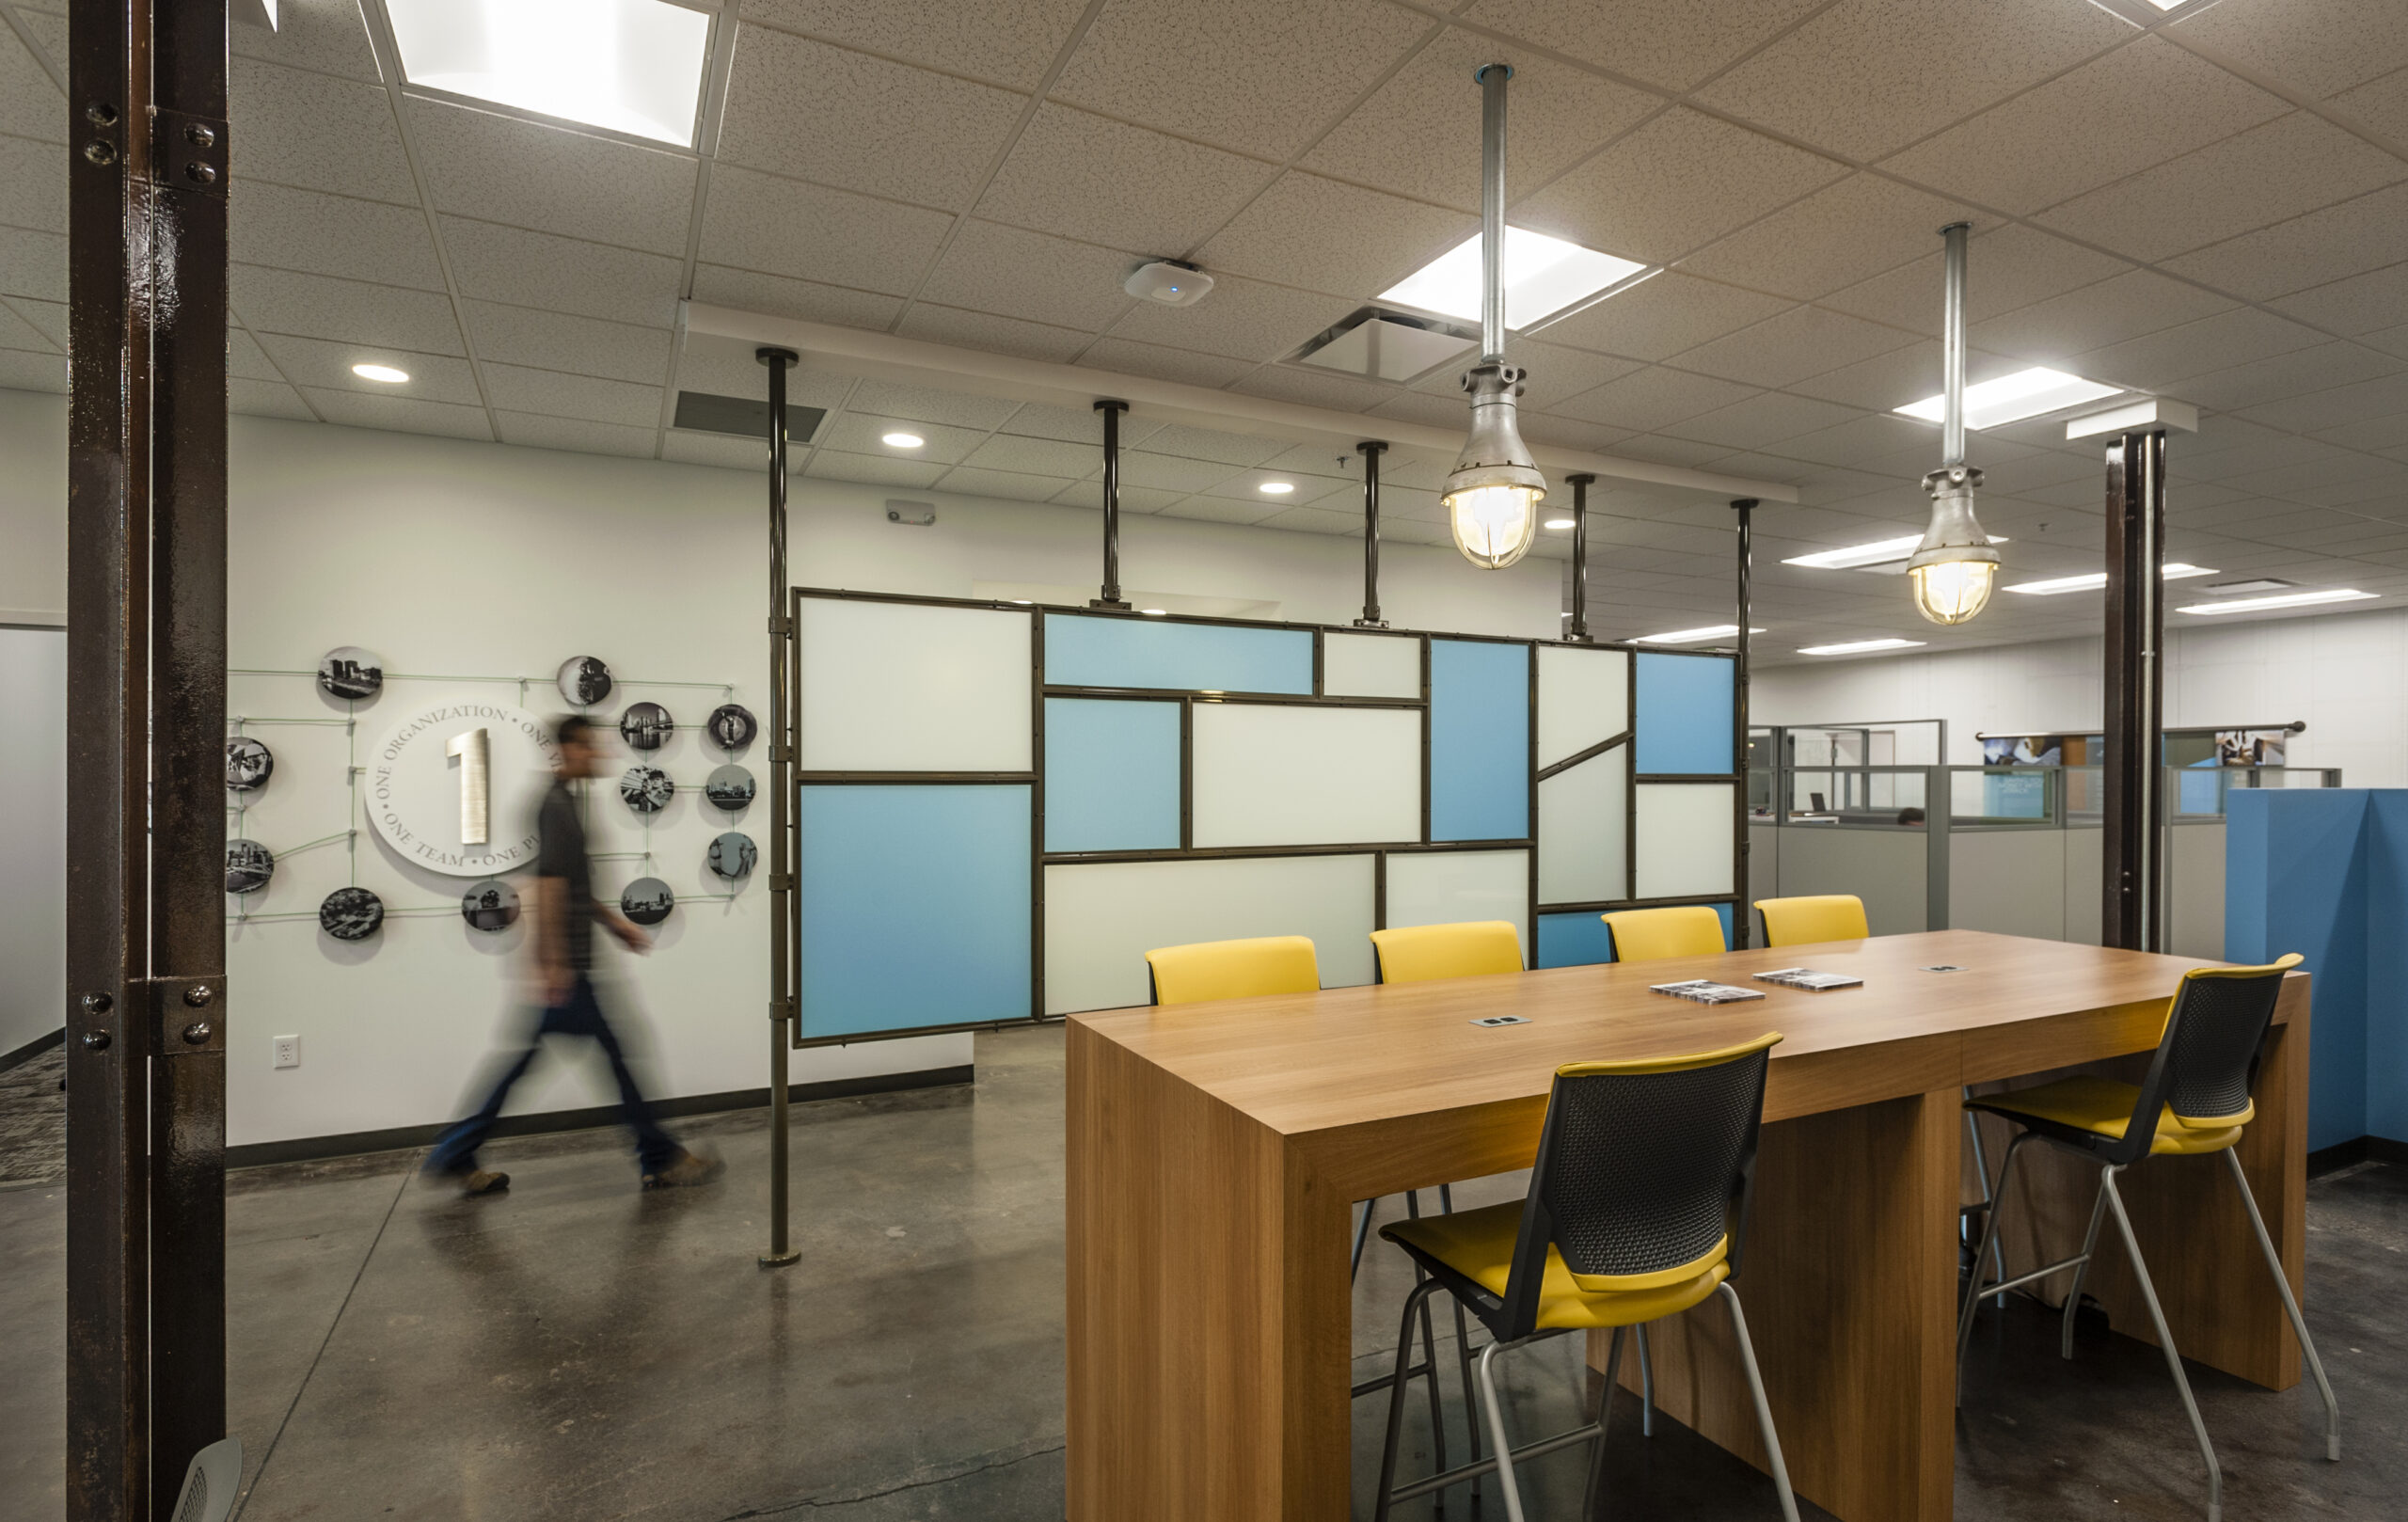 Designing Spaces for the Evolving Workforce